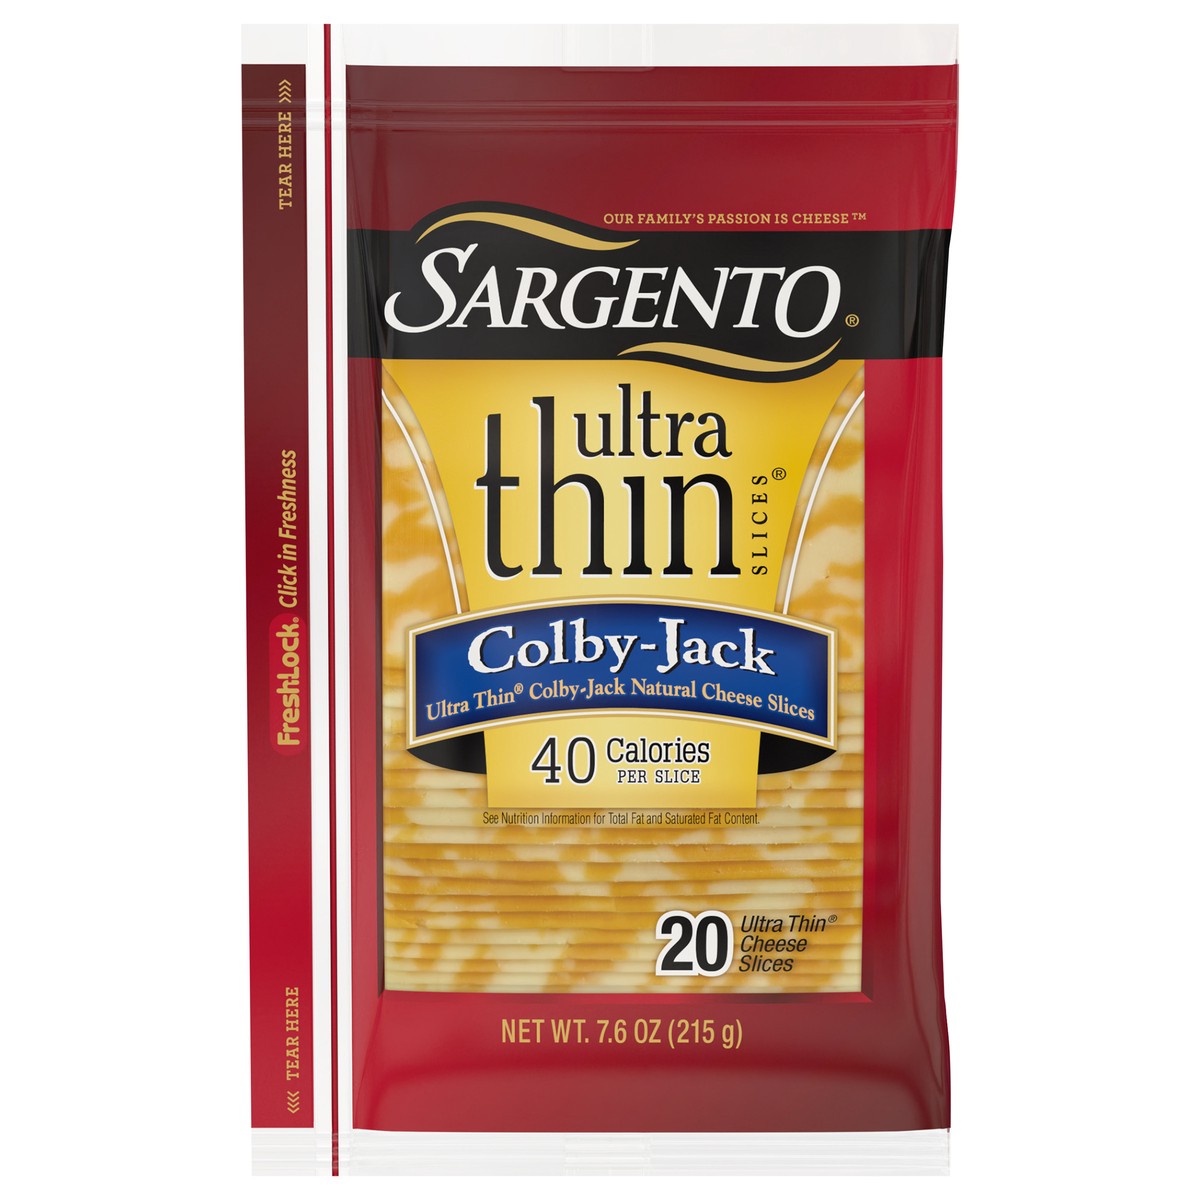 slide 1 of 6, Sargento Colby-Jack Natural Cheese Ultra Thin Slices, 7.6 oz., 20 slices, 7.6 oz